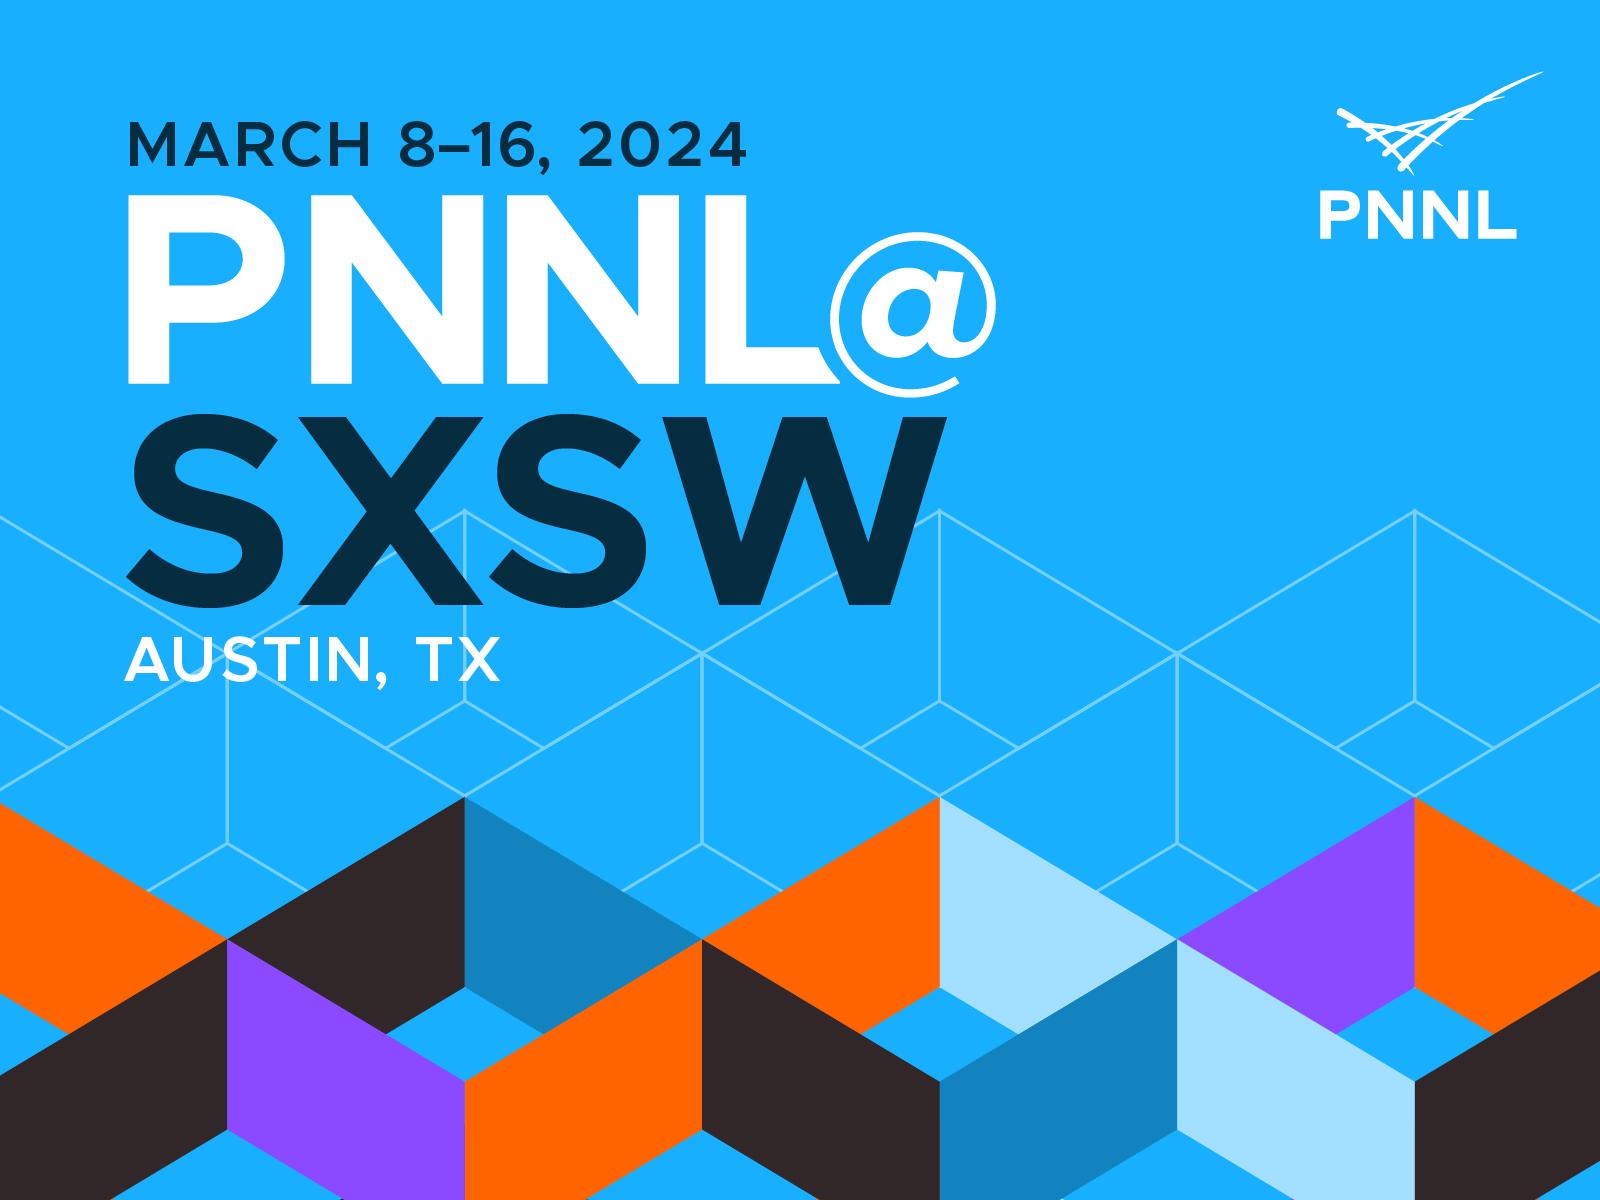 PNNL at South By Southwest in Austin, Texas